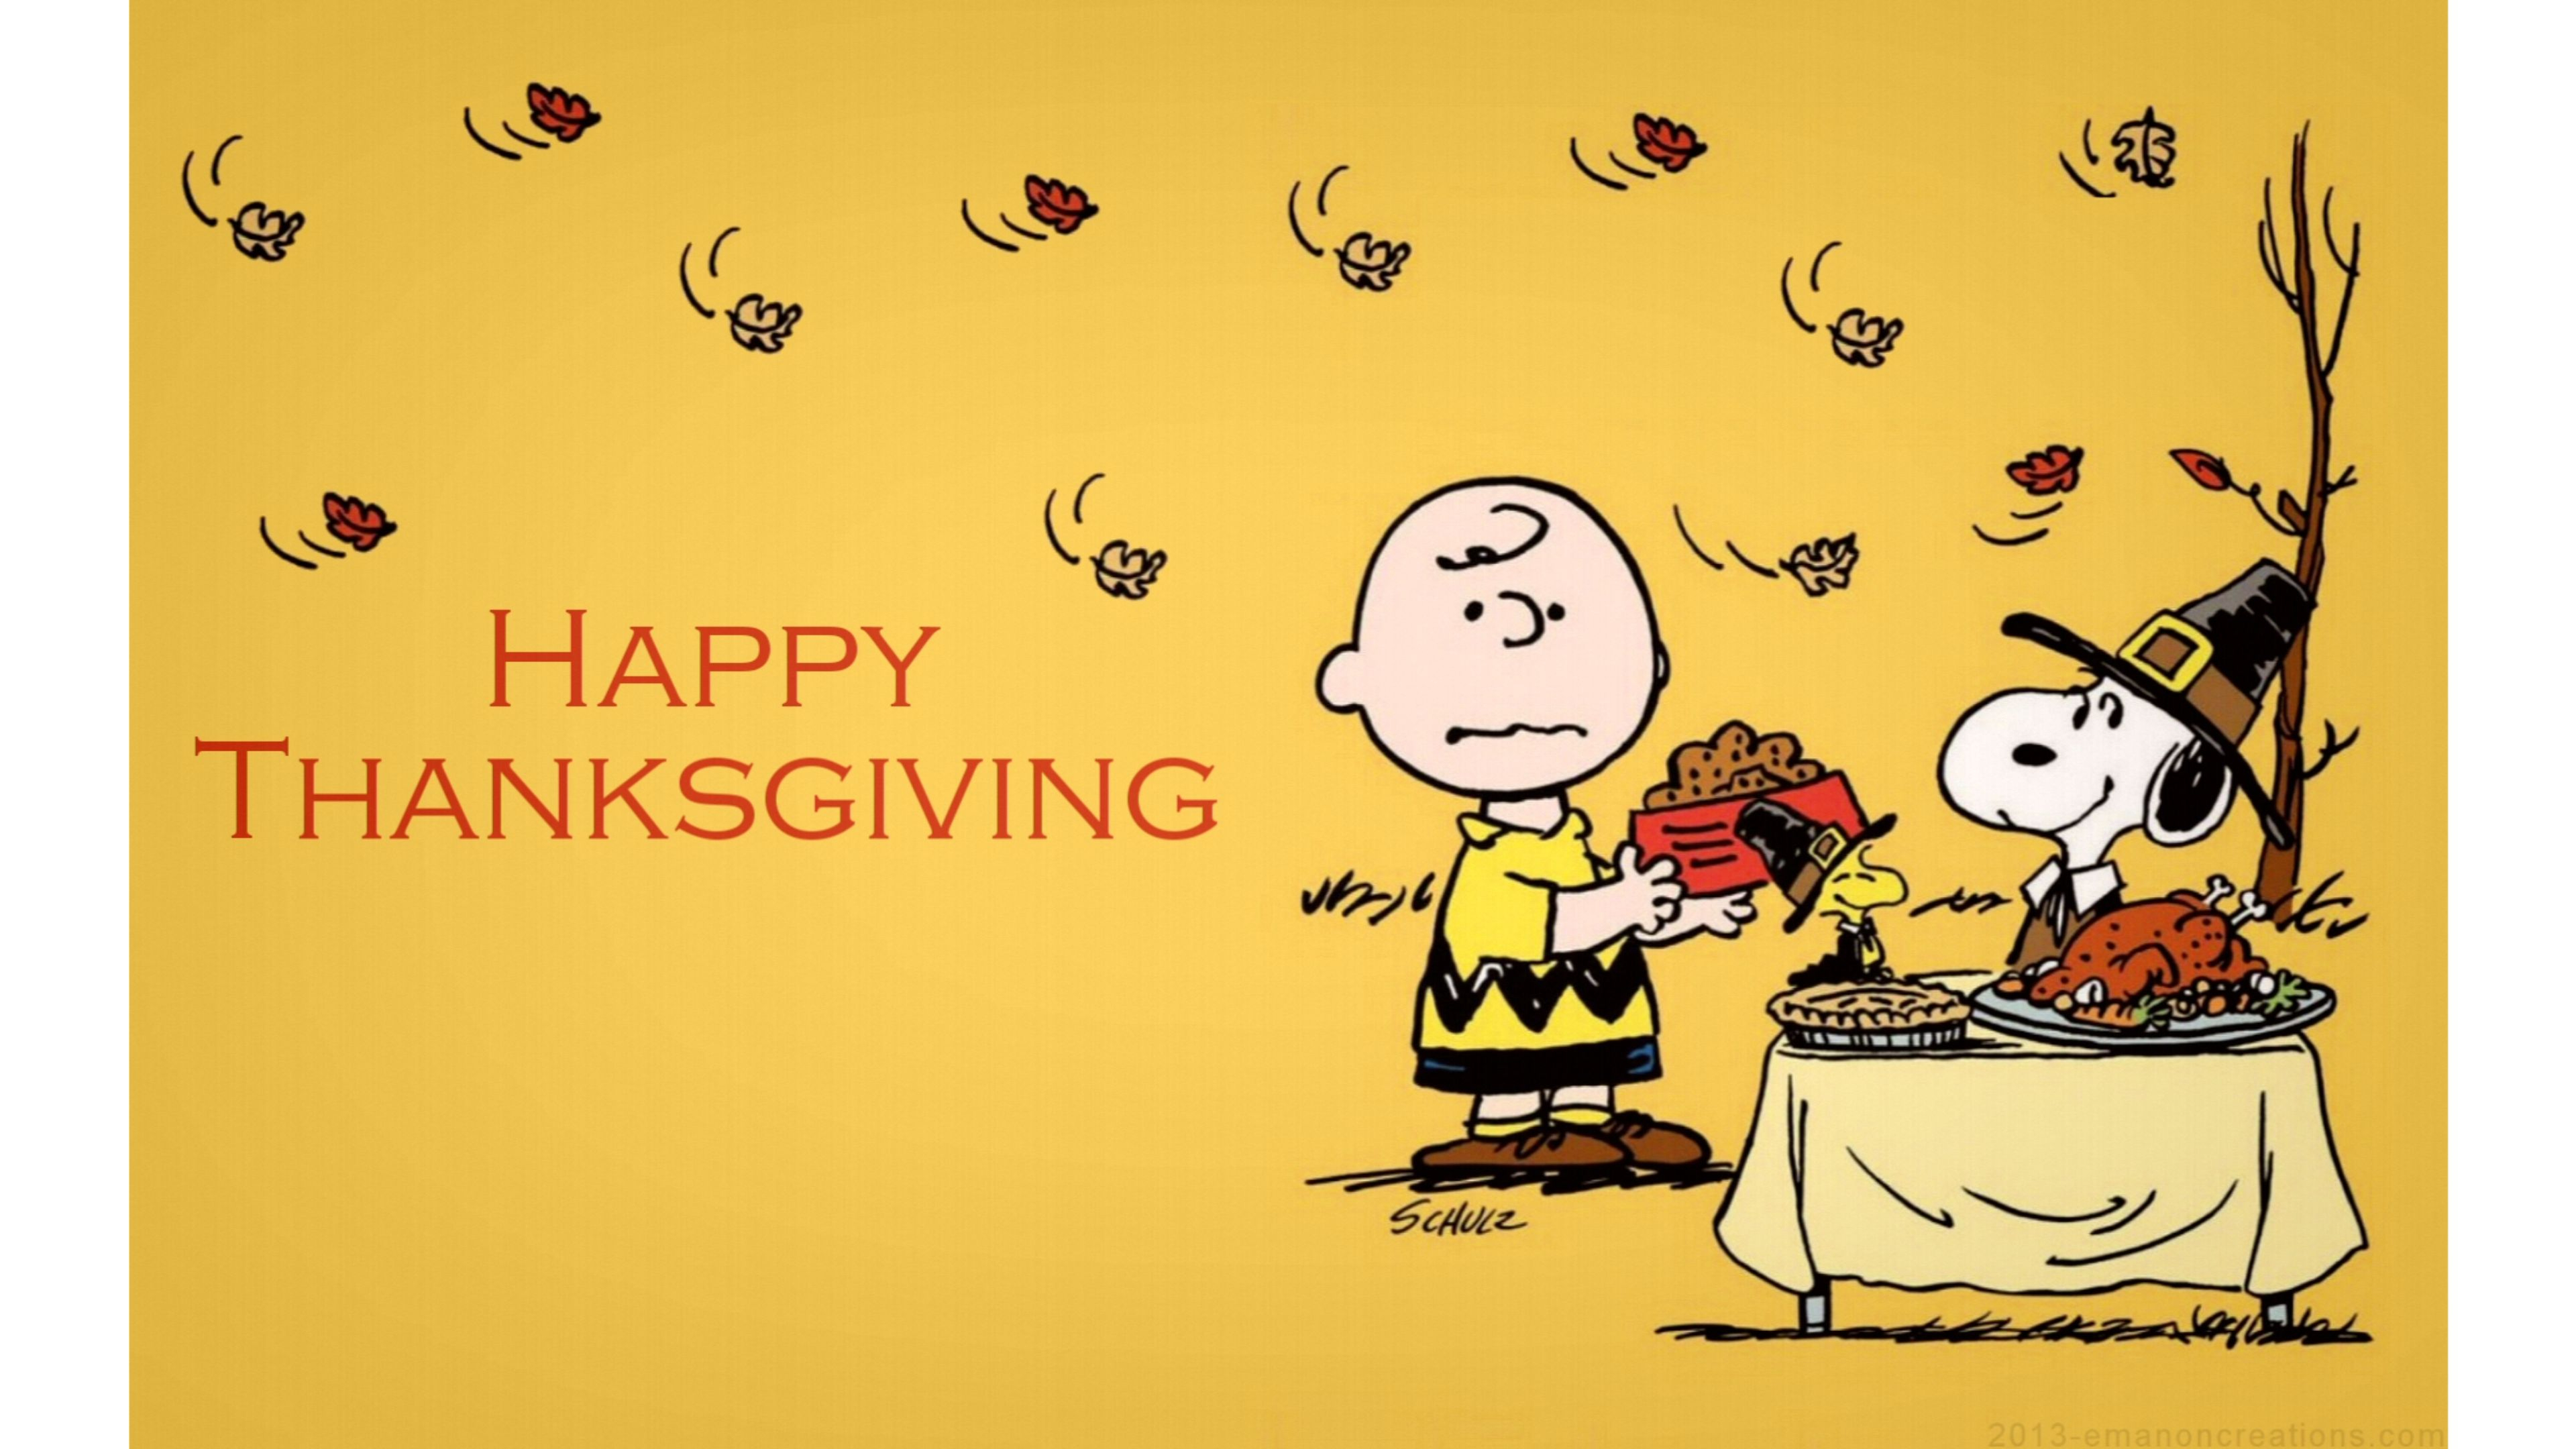 3840x2160 Charlie Brown Thanksgiving Wallpapers Top Free Charlie Brown Thanksgiving Backgrounds